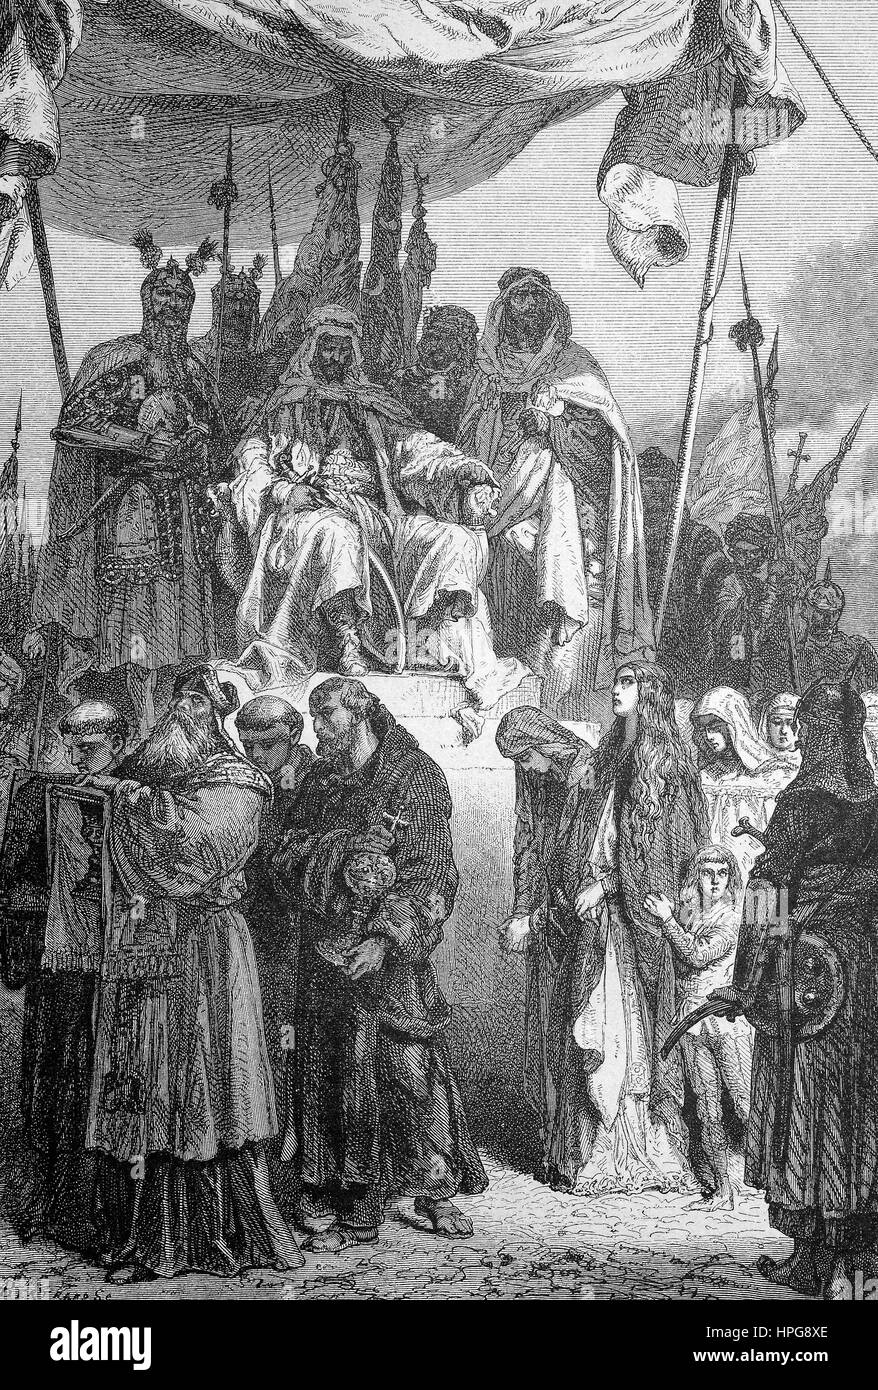 After the conquest of Jerusalem, Saladin lets the captured Christians pass by, Saladin l??t nach der Eroberung von Jerusalem die gefangenen Christen an sich vor?berziehen. An-Nasir Salah ad-Din Yusuf ibn Ayyub, known as Saladin, 1137 - 1193, was the first sultan of Egypt and Syria and the founder of the Ayyubid dynasty, digital improved reproduction of a woodcut from the year 1885 Stock Photo